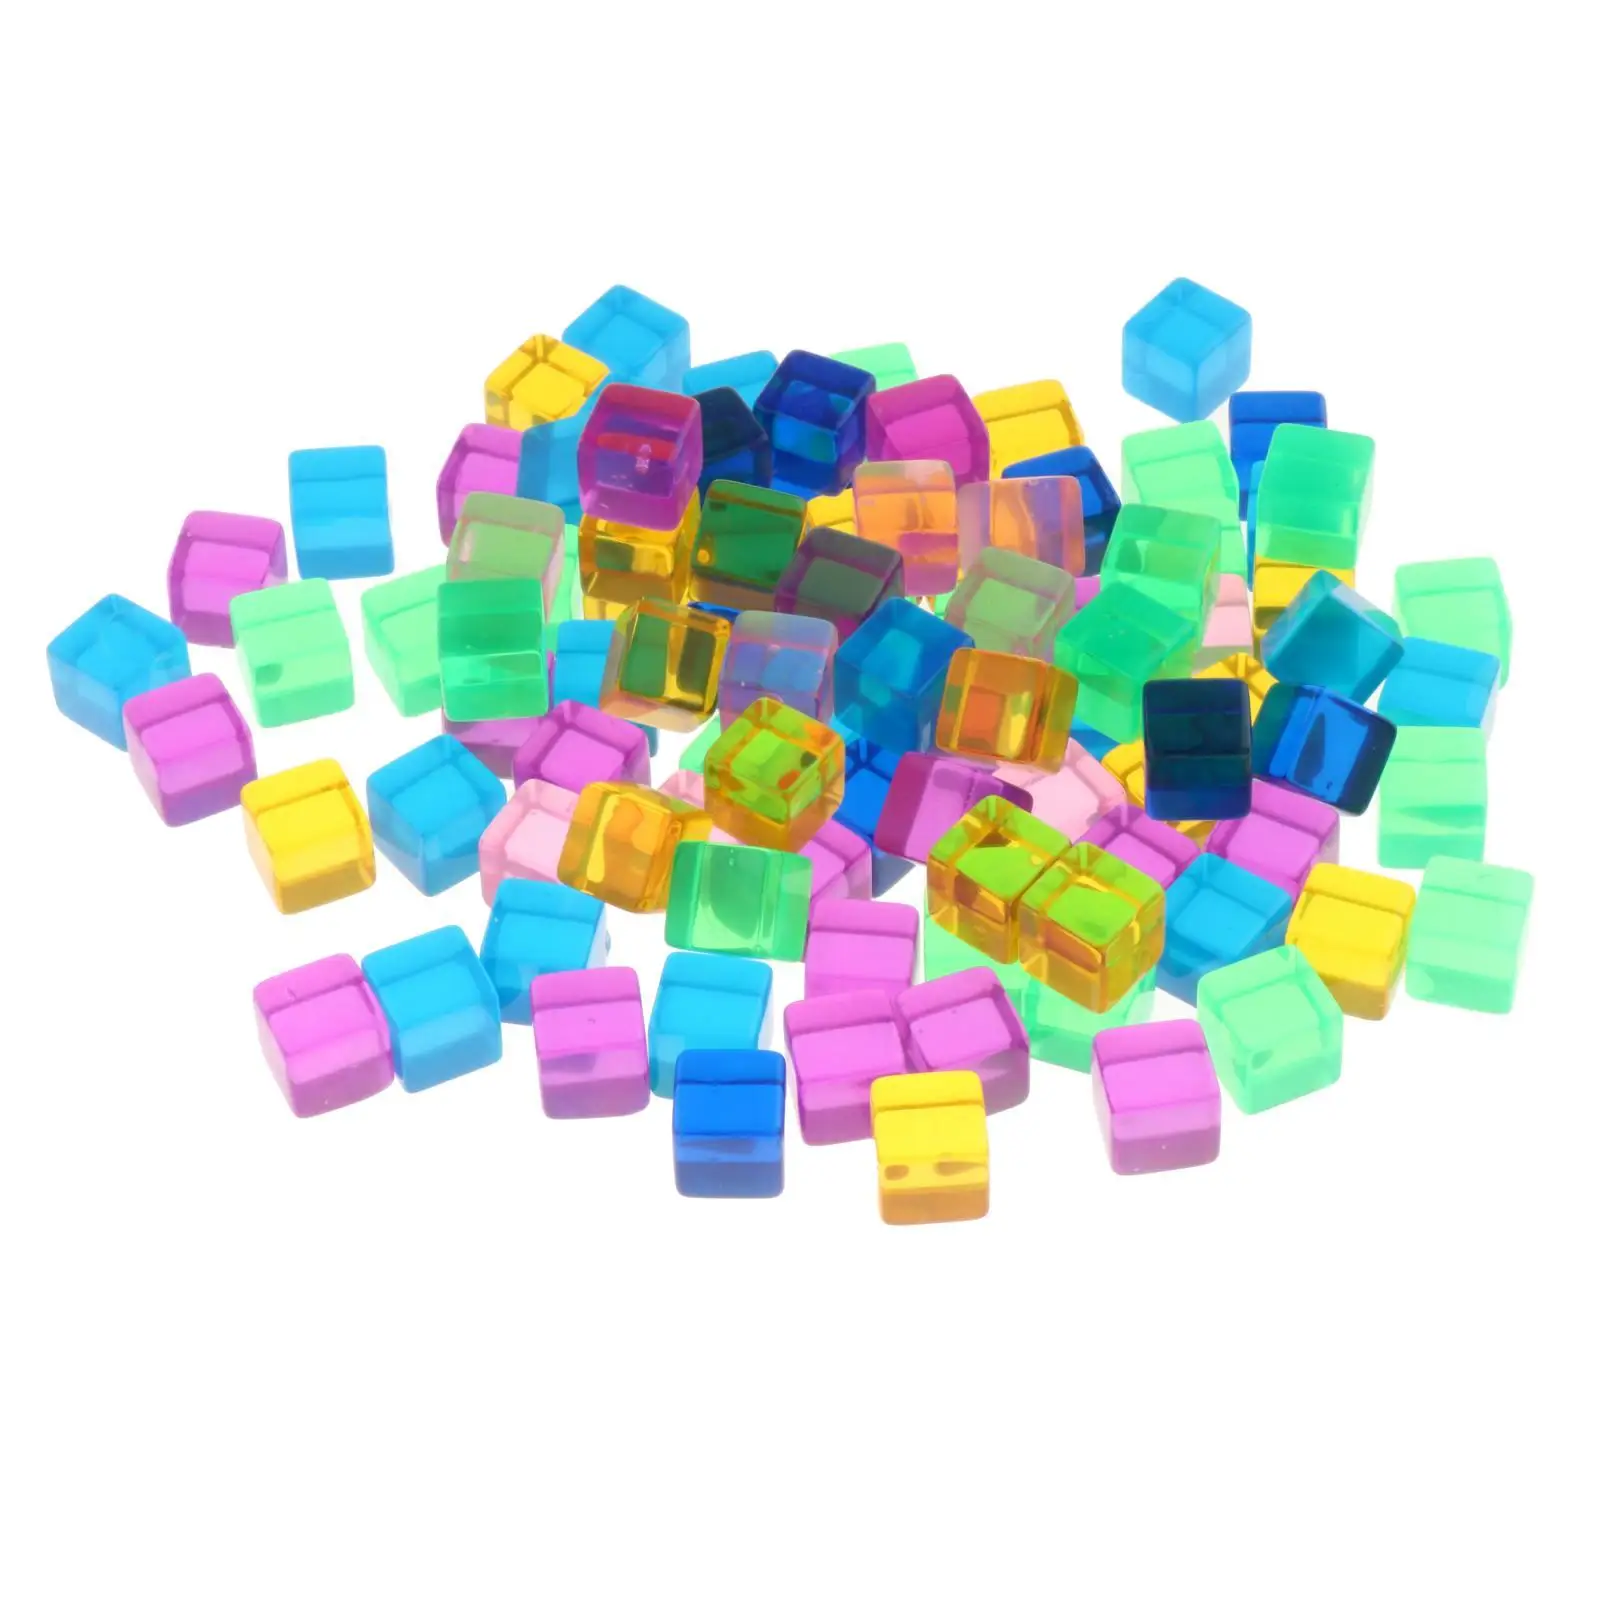 100x D6 16mm Transparent Blank Dices Translucent Colors Square Corner Clear Cube Square Dice for Teaching Math Playing Games